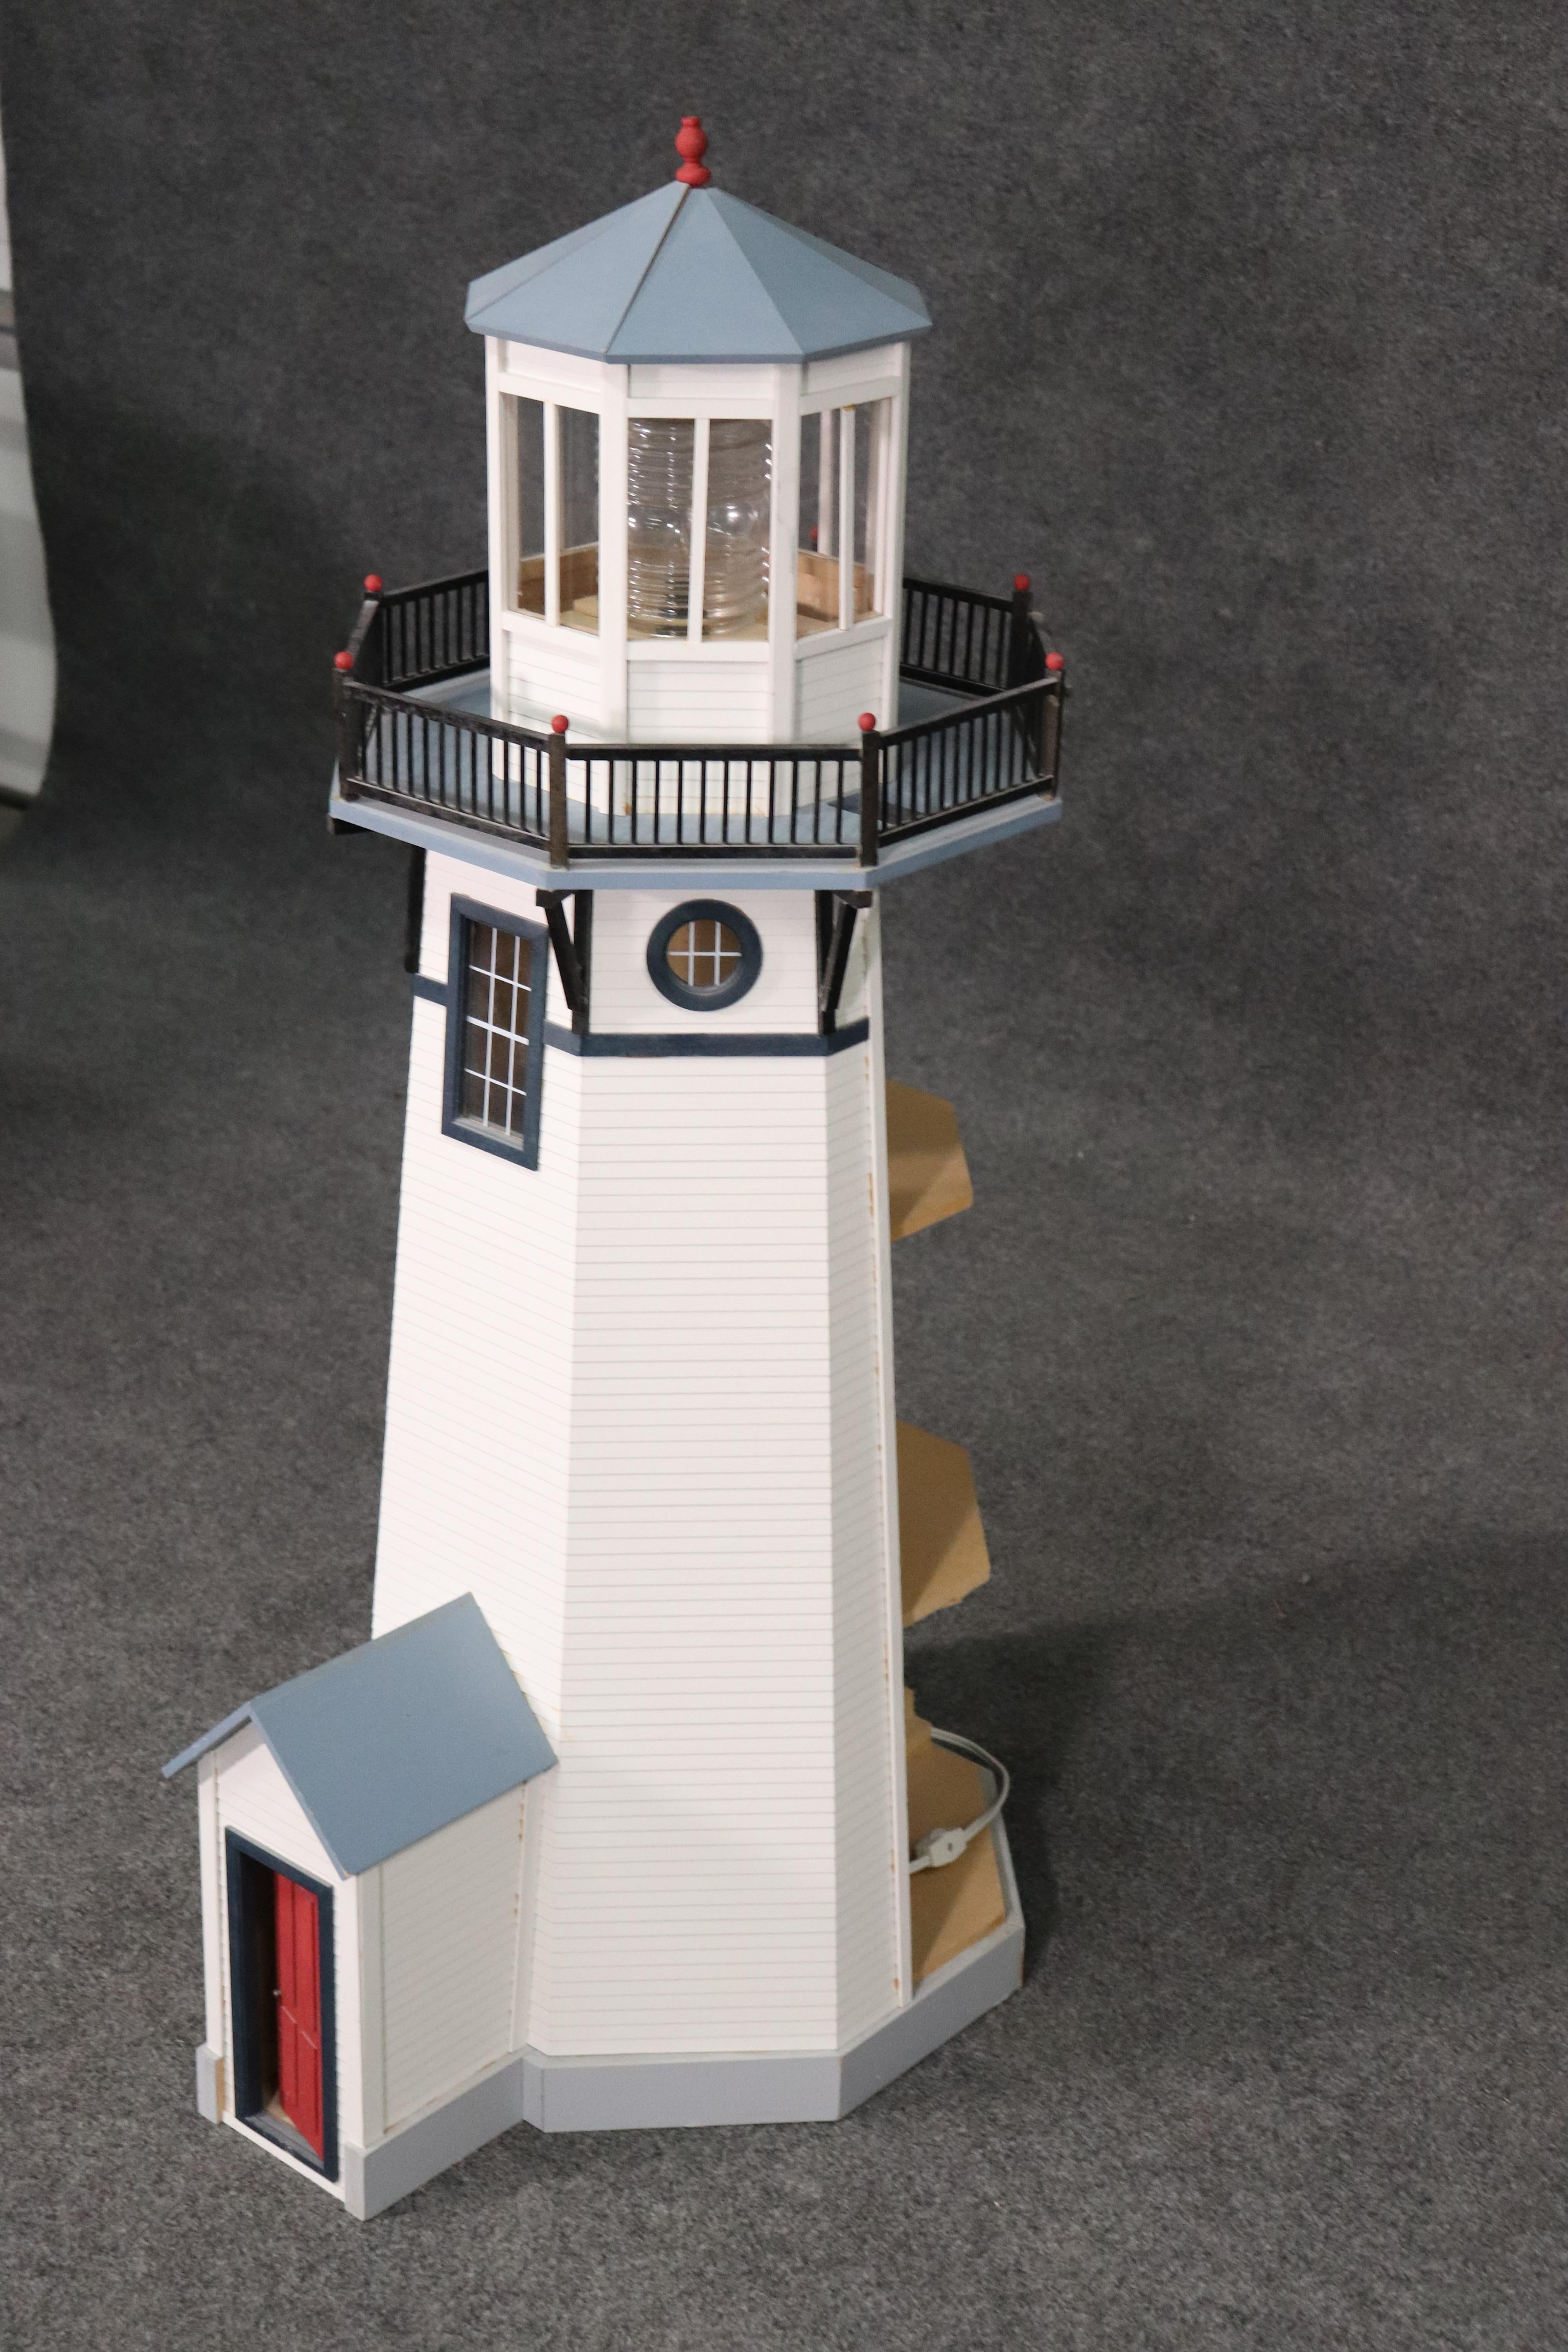 This is a beautifully crafted lighthouse that's been hand crafted and hand painted to accurately replicate what appears to be a New England lighthouse. The piece measures 44 tall x 18 wide x 23 deep. The top section containing the light needs